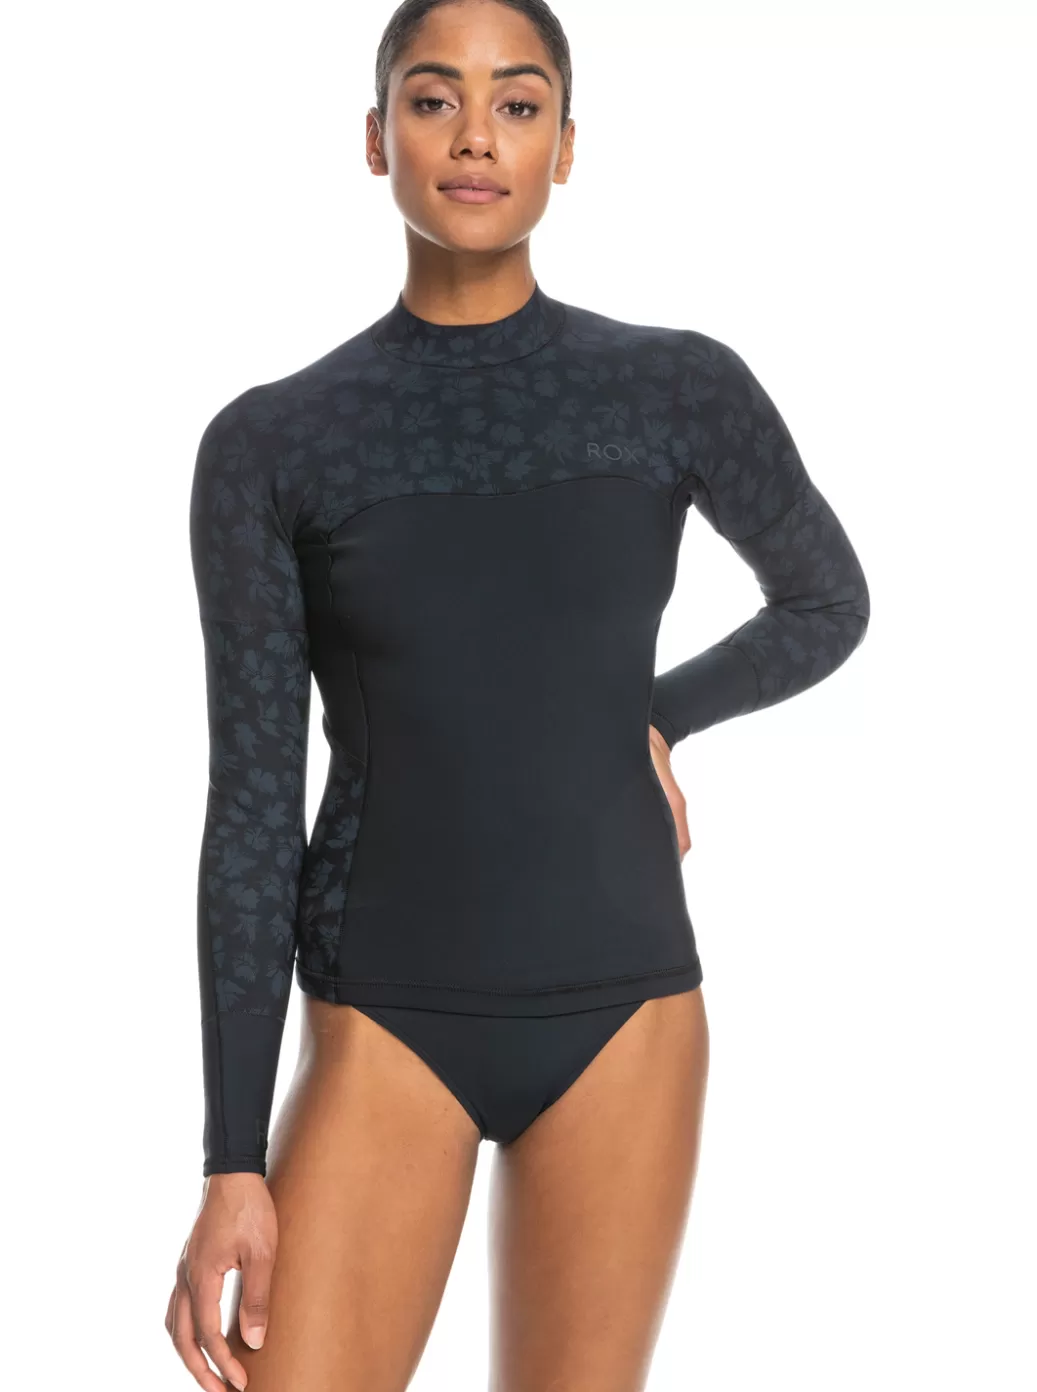 Swell Series | WOMEN ROXY 1mm Swell Series Long Sleeve Wetsuit Top Black